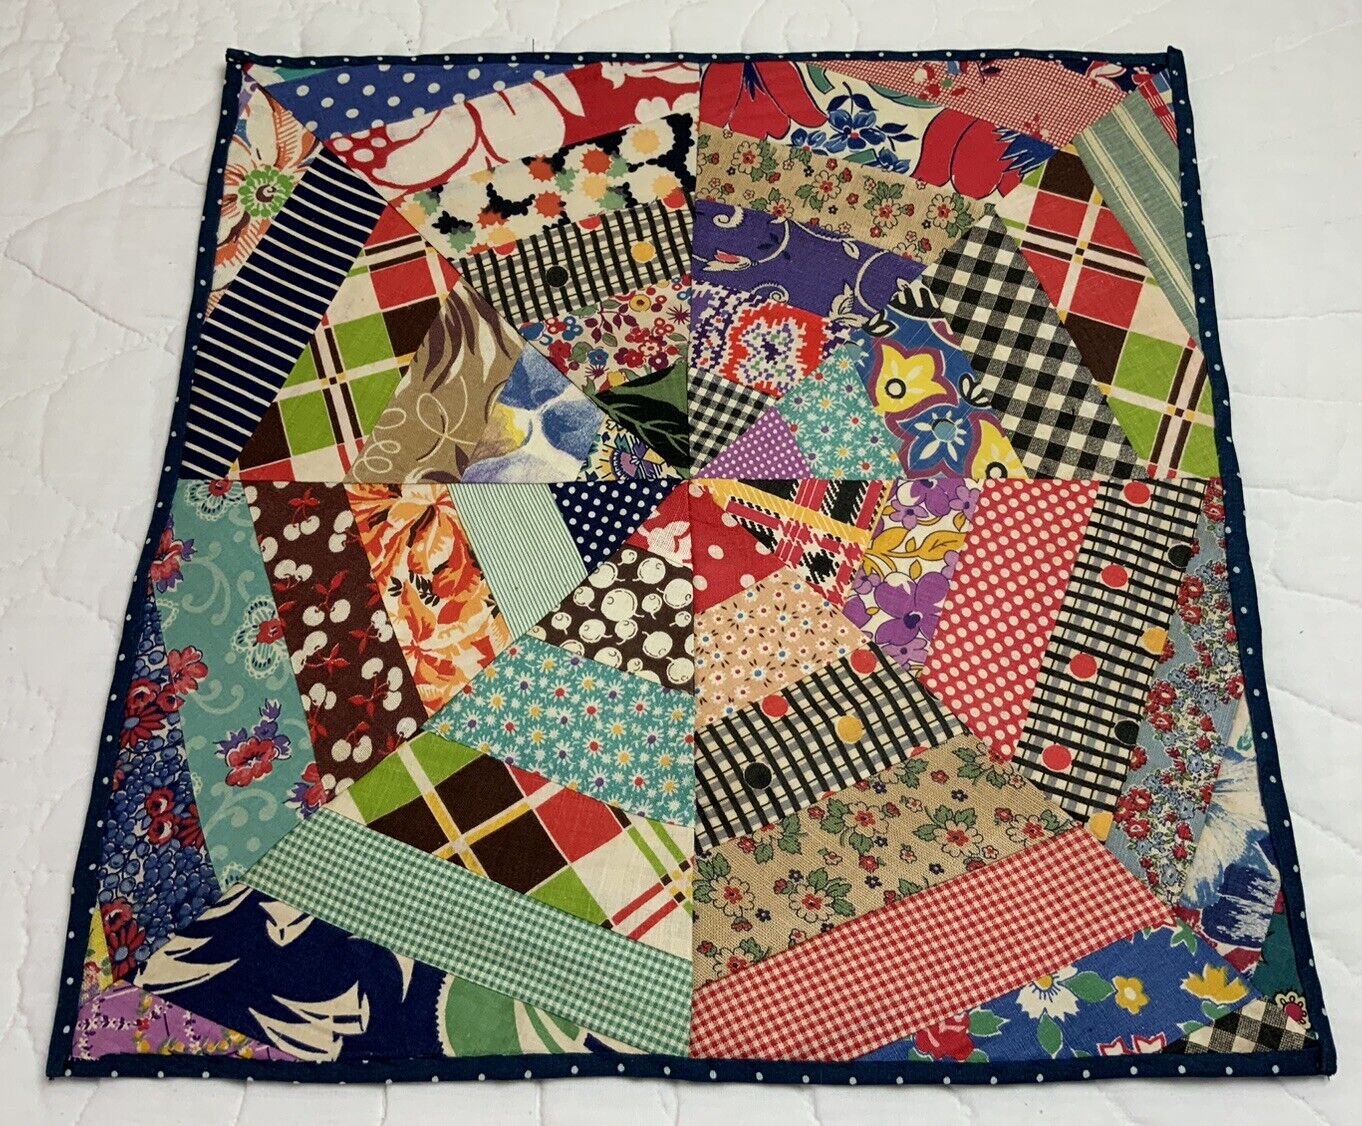 Vintage Patchwork Quilt Table Topper, Pinwheel With Rectangles, 50’s Calicos